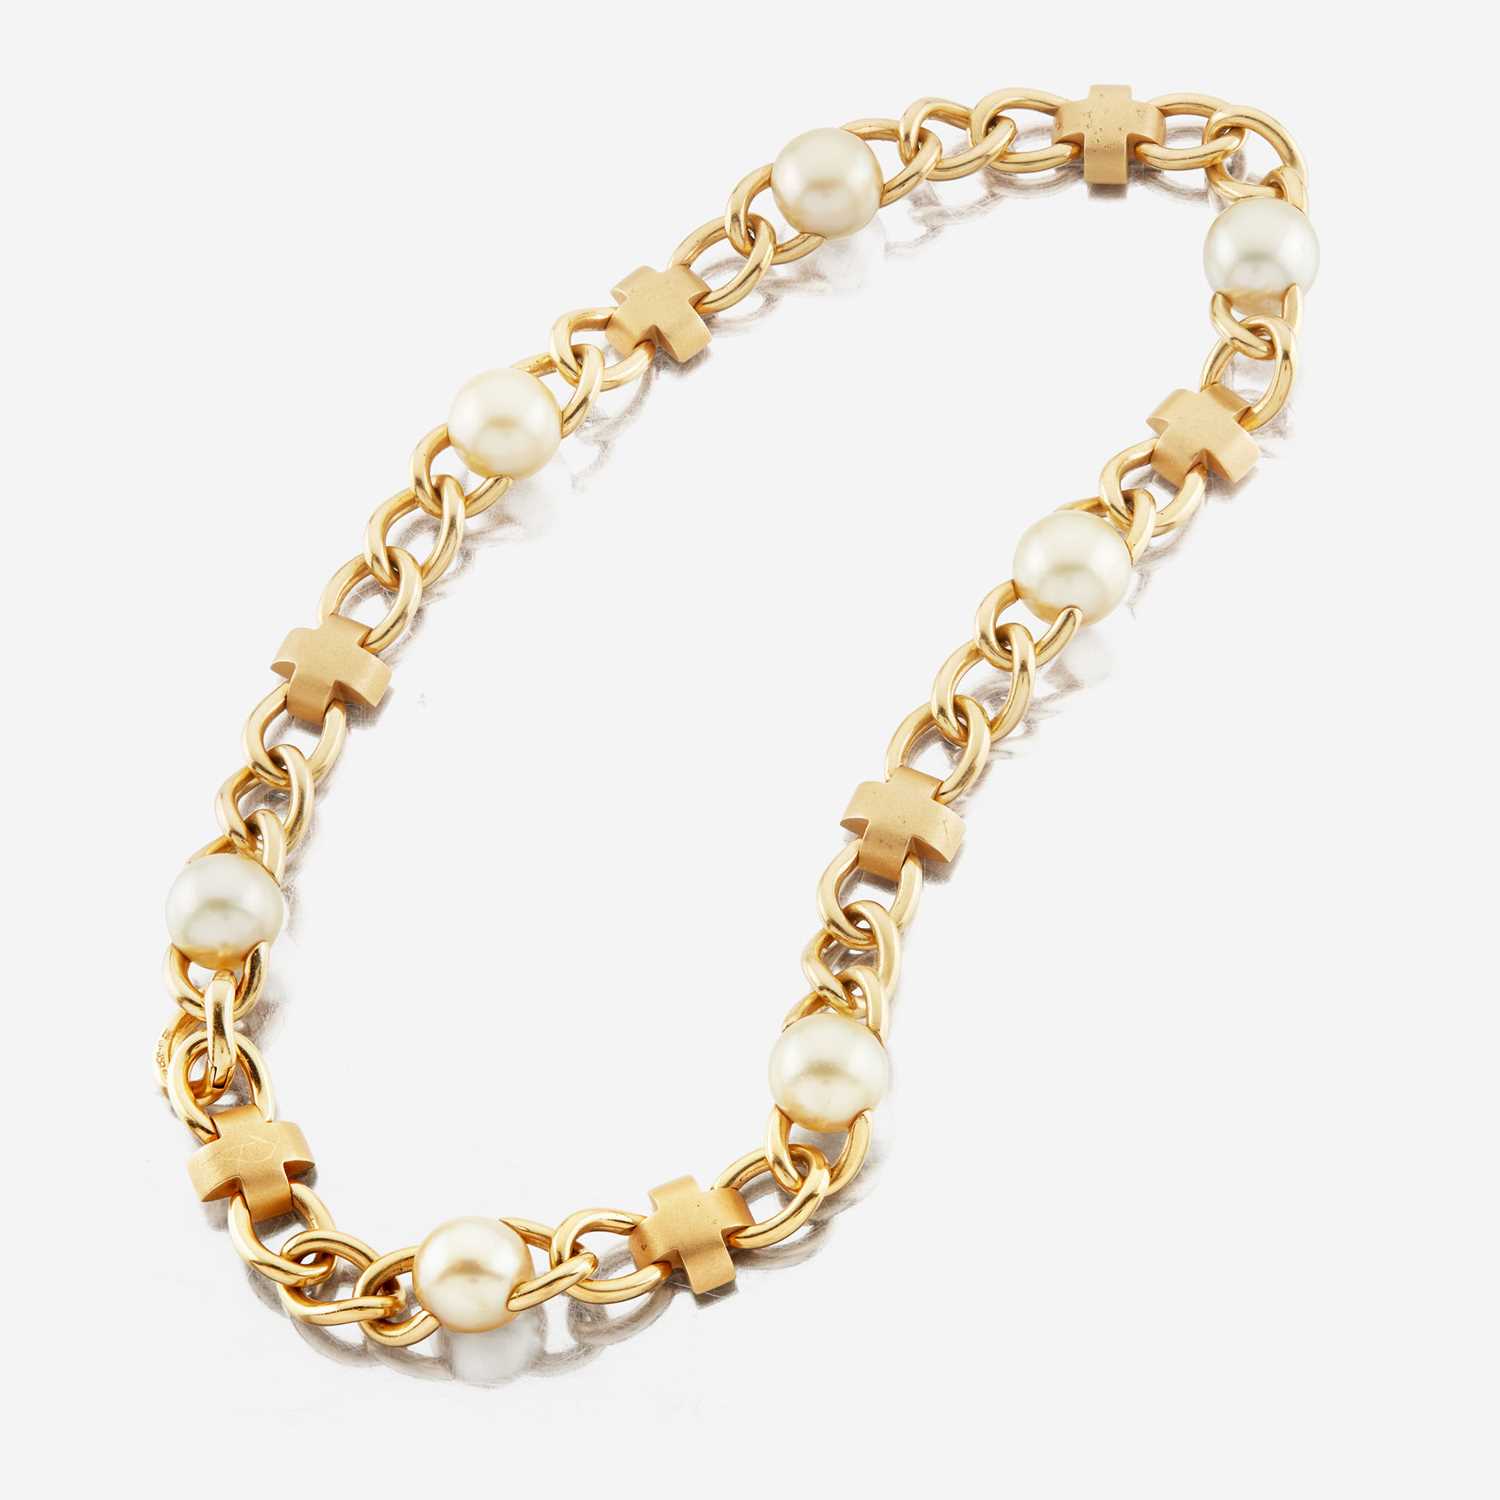 Lot 57 - A gold and cultured pearl necklace, Italy